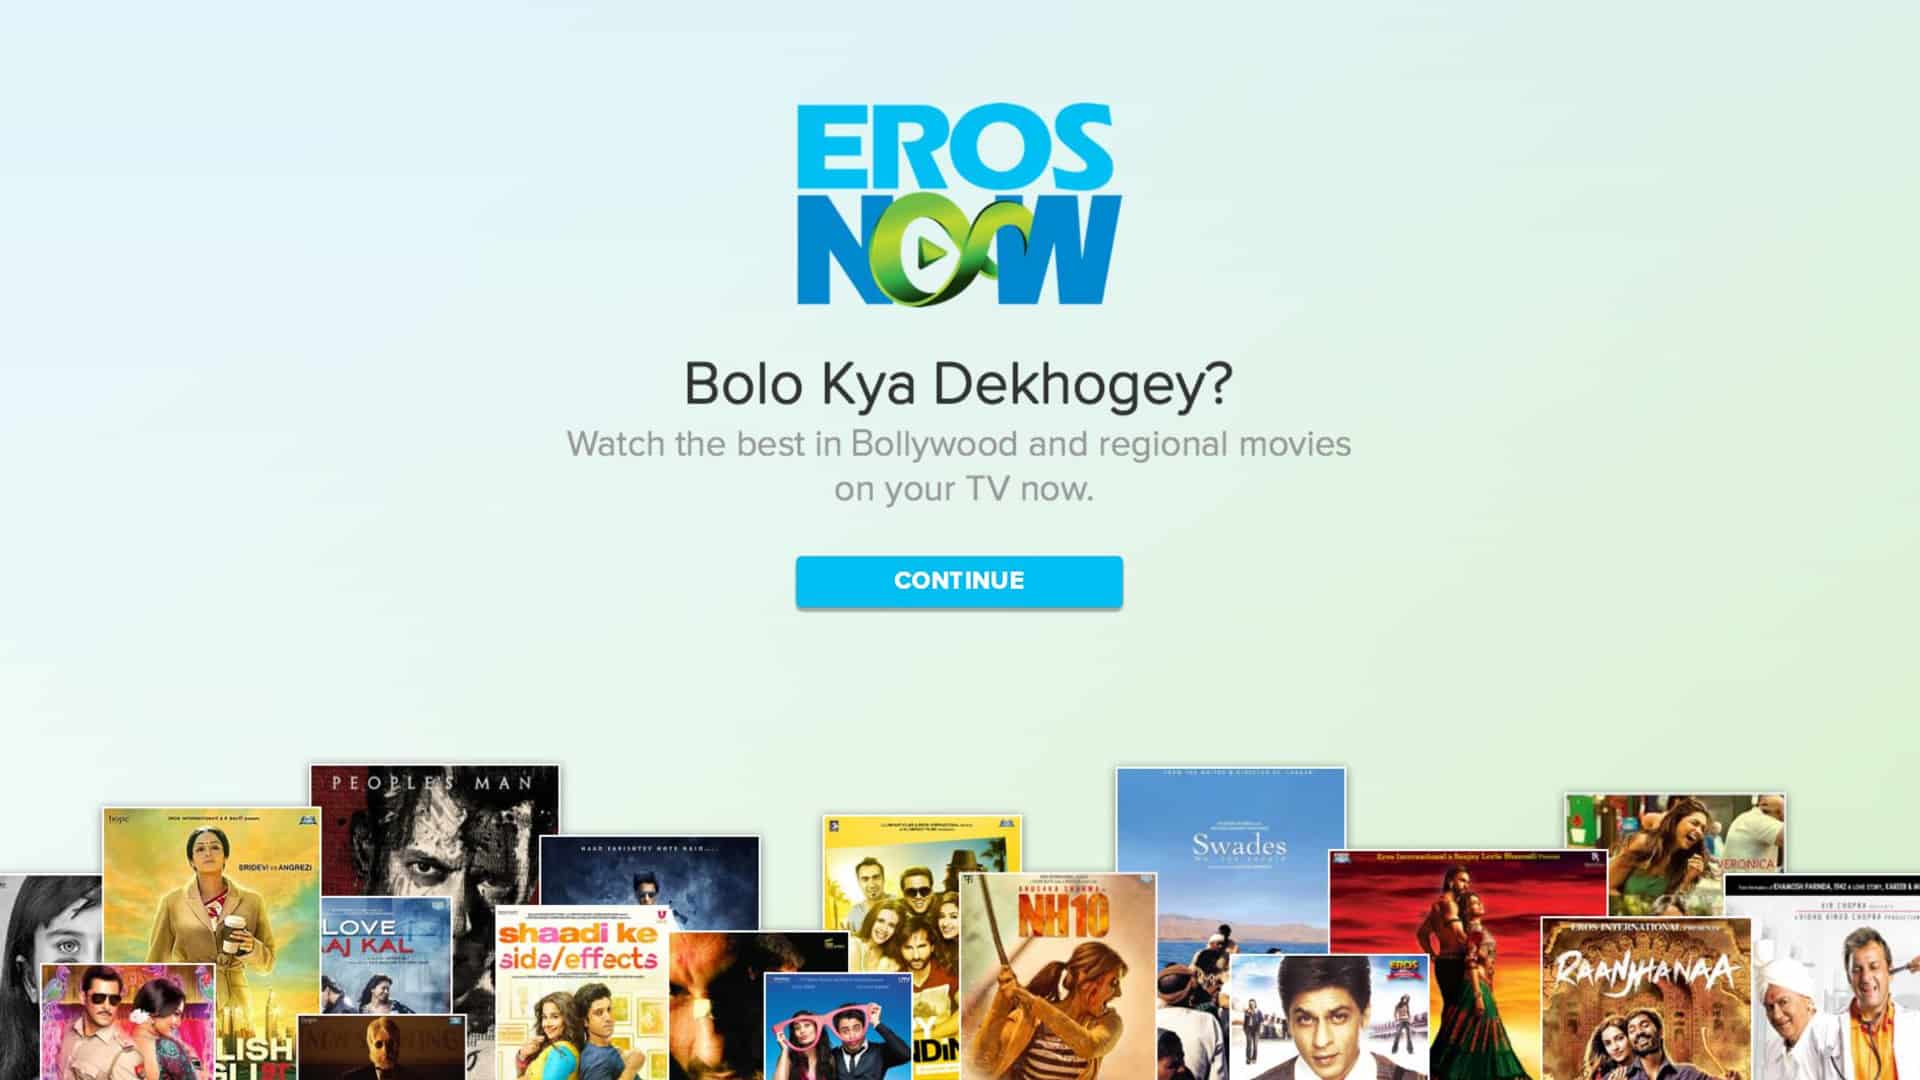 Eros Now targets to take total subscribers to 50 mn by March 2023